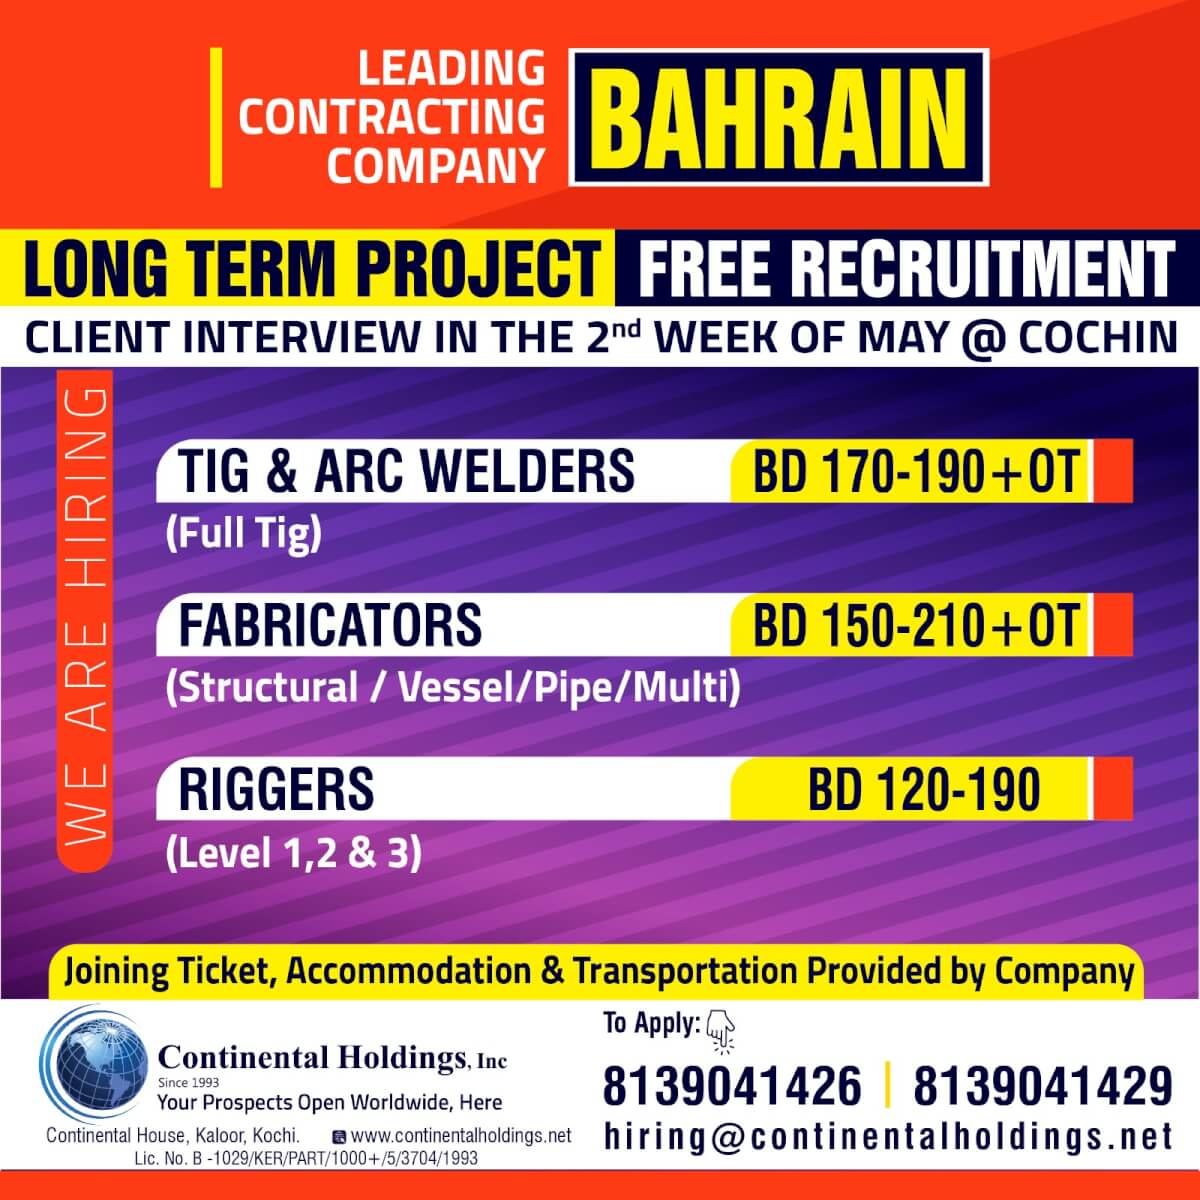 Hiring for Bahrain - Direct Client interview at Cochin in the second week of May